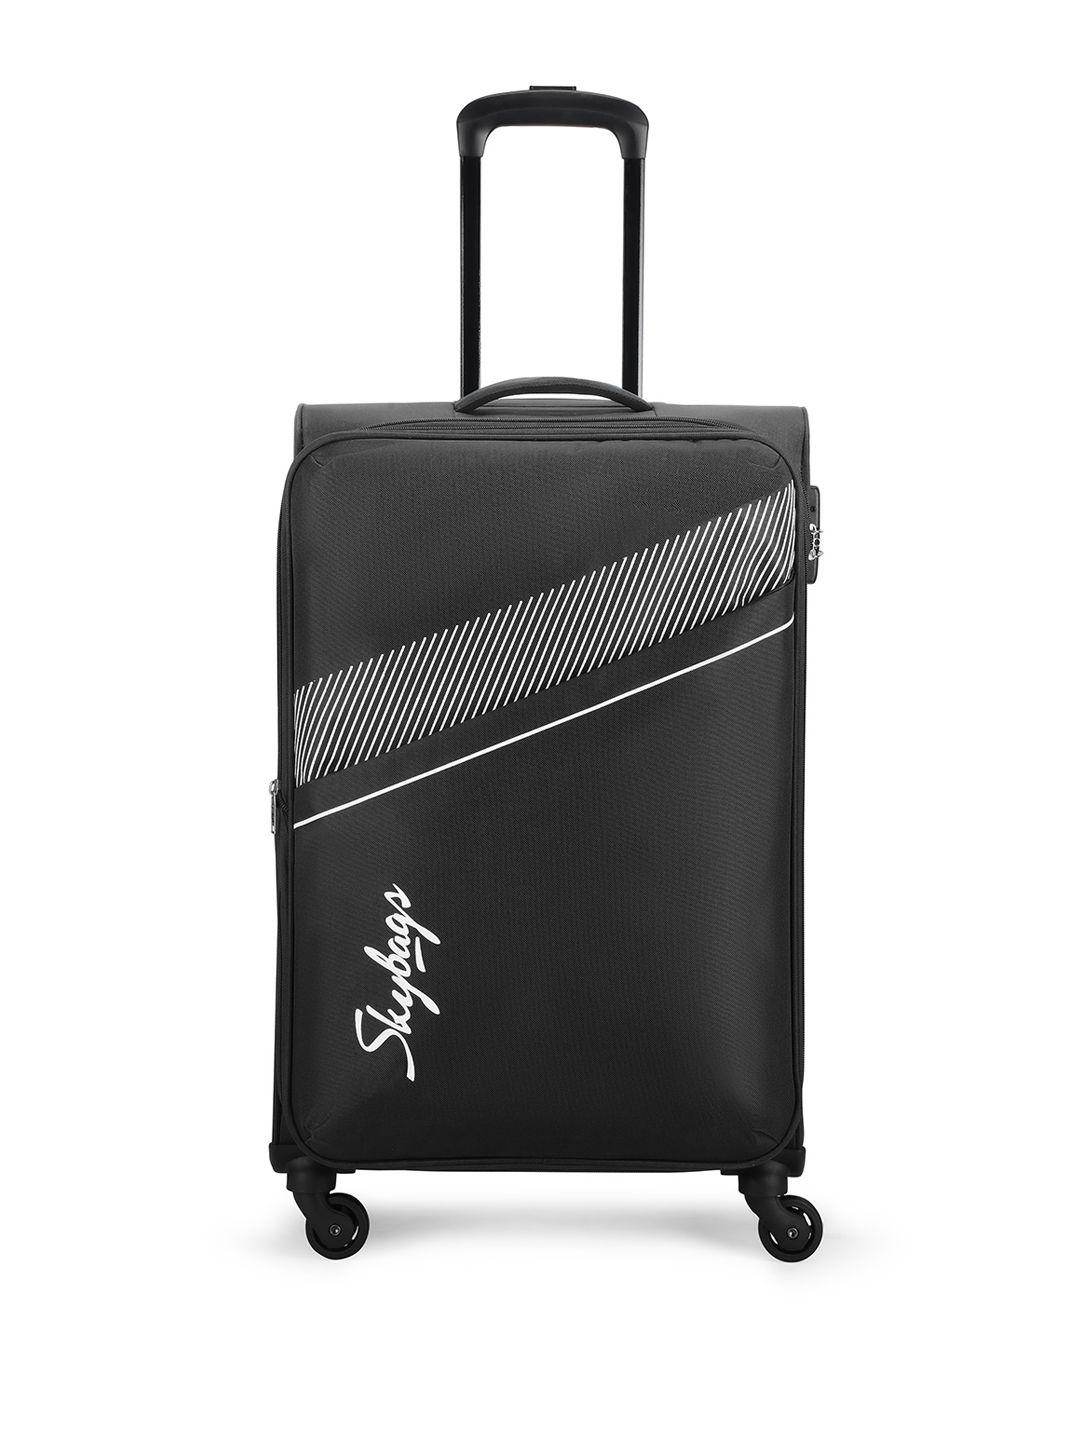 skybags unisex striped soft medium trolley suitcase